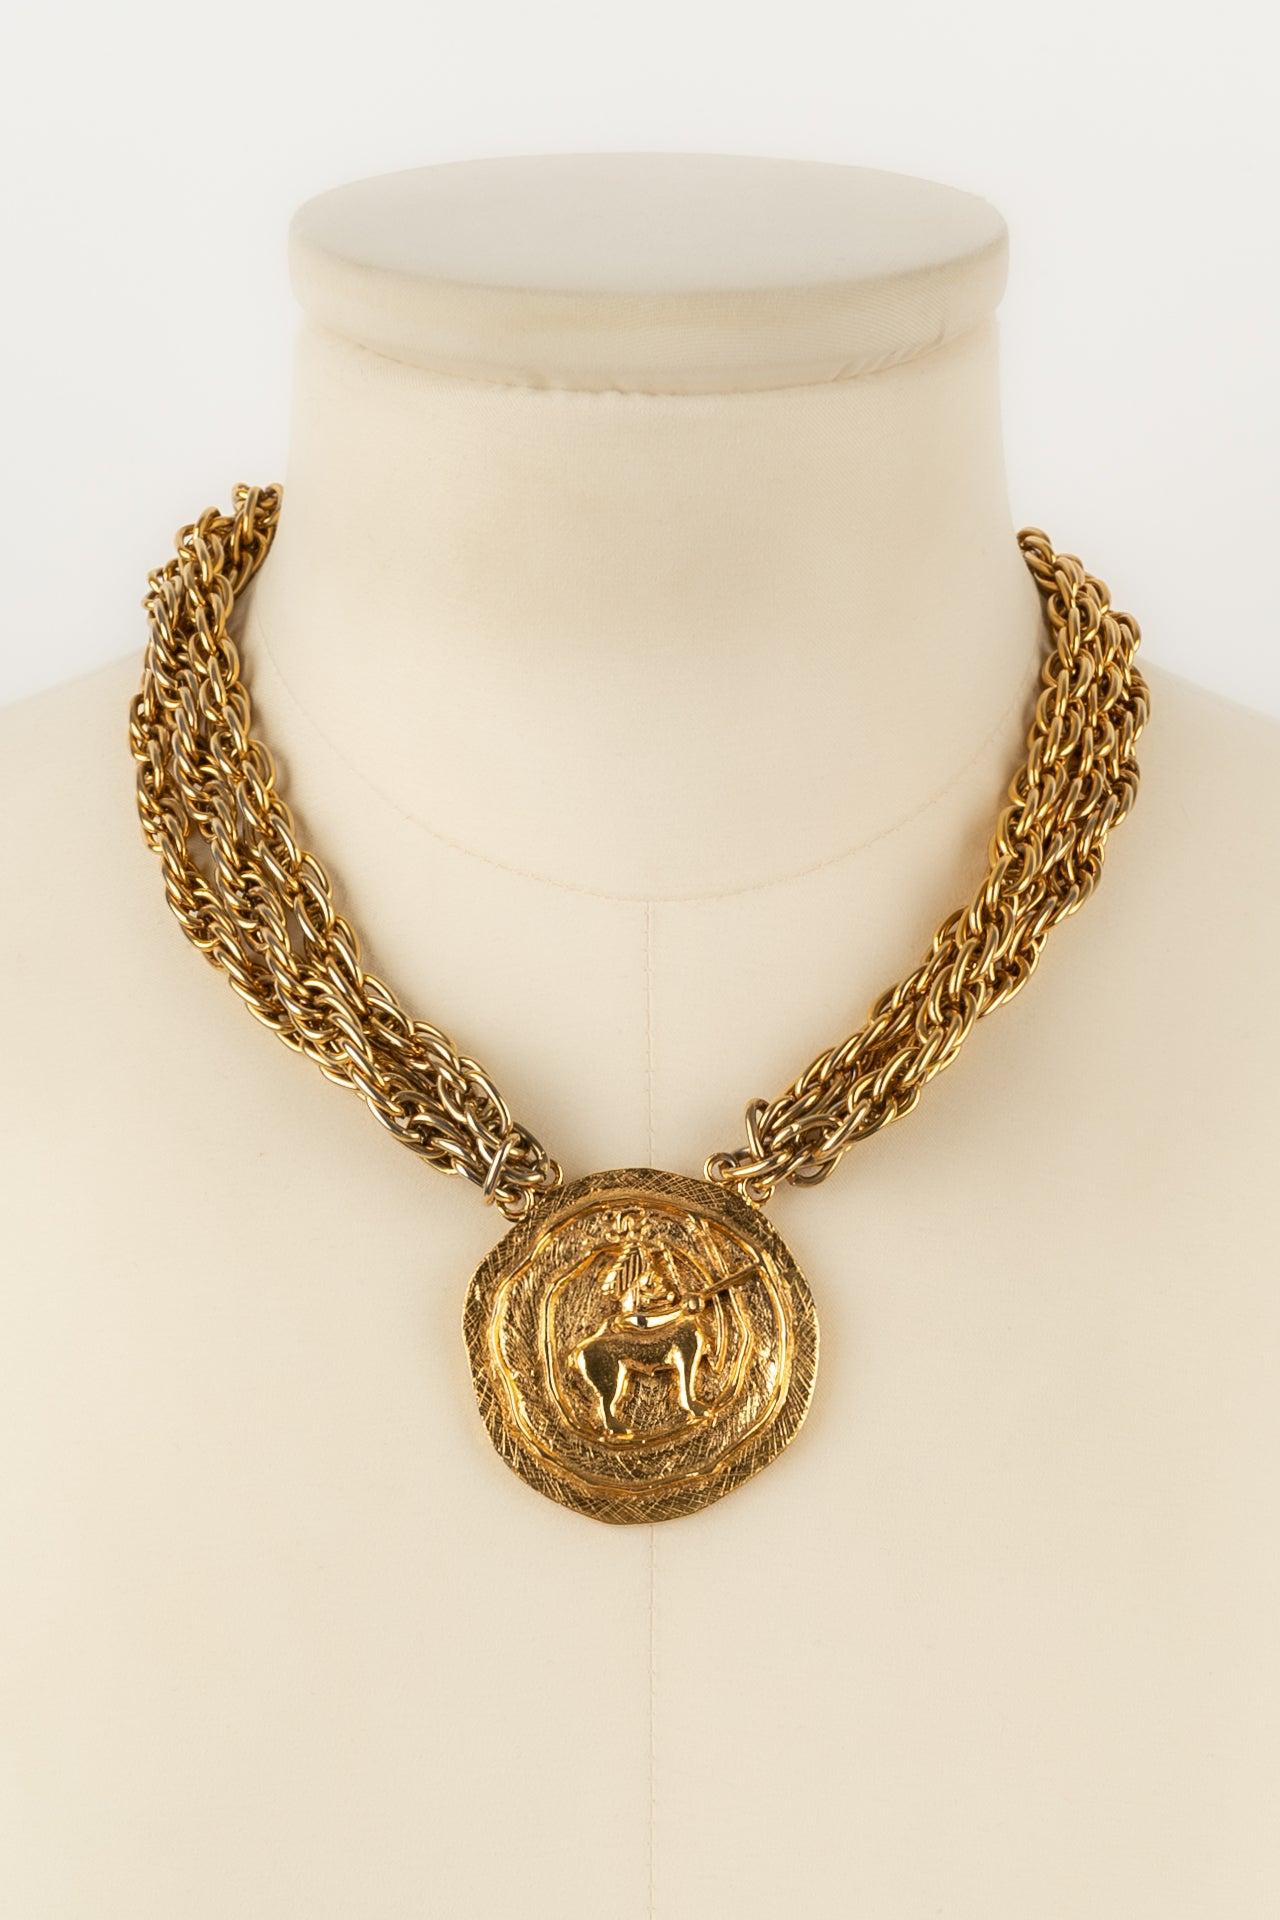 Women's Chanel Multi Chain Necklace in Gold Metal and Engraved Medallion For Sale